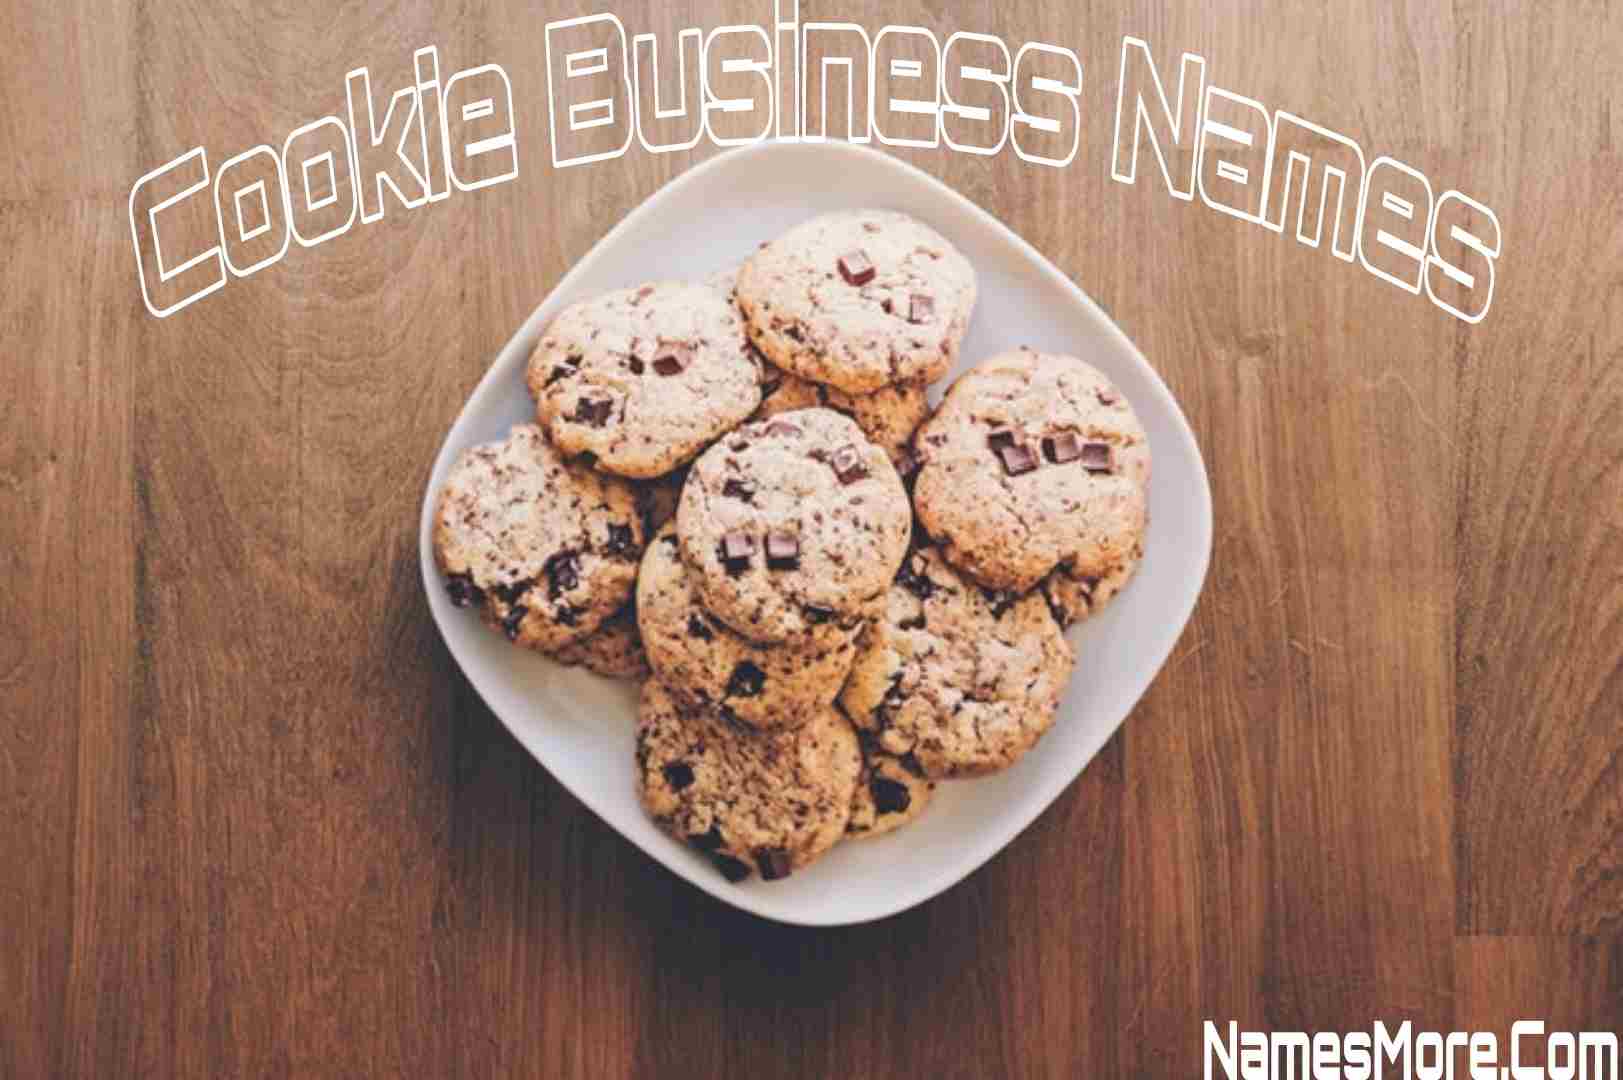 Featured Image for 800+ Cookie Business Names [Creative And Unique]